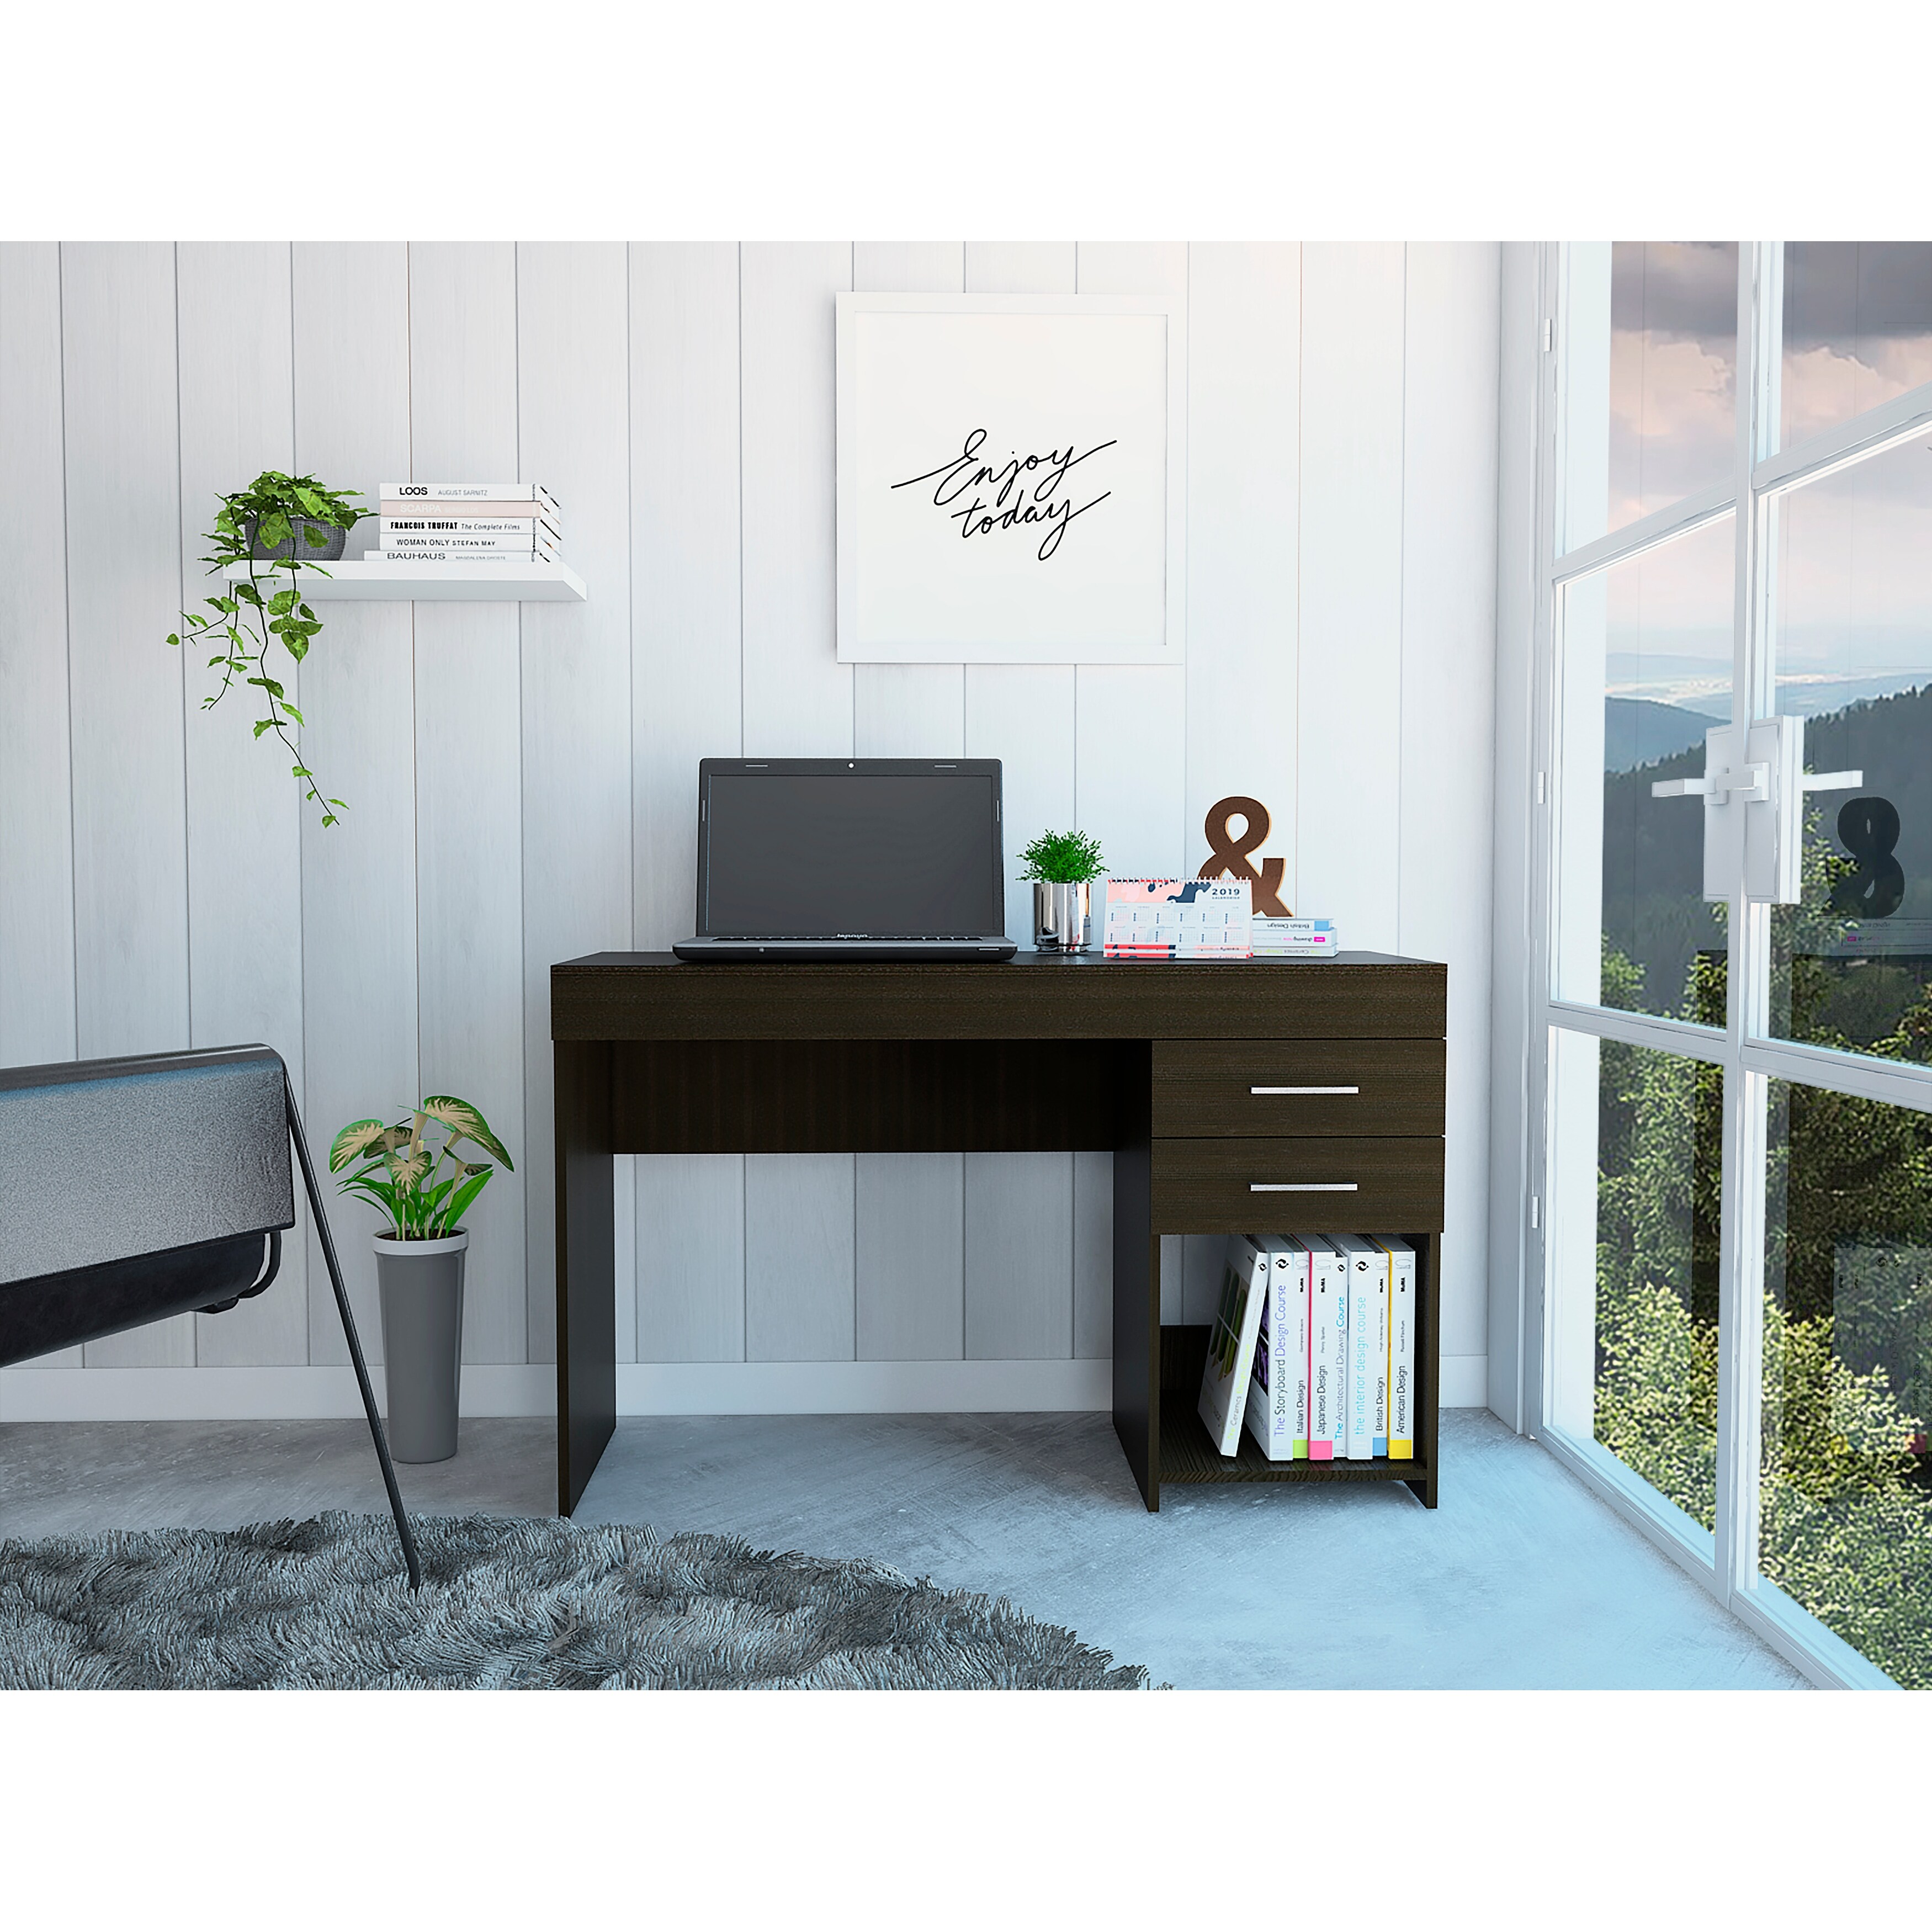 https://ak1.ostkcdn.com/images/products/is/images/direct/42908caf52836cefd1093076a31286a346a3852a/Computer-Desk-with-2-Drawers-and-1-Open-Storage-Compartments%2C-Wood-Writing-Home-Office-Workstation%2C-29.5%22-H-x-17.9%22D-x-47.2%22W.jpg